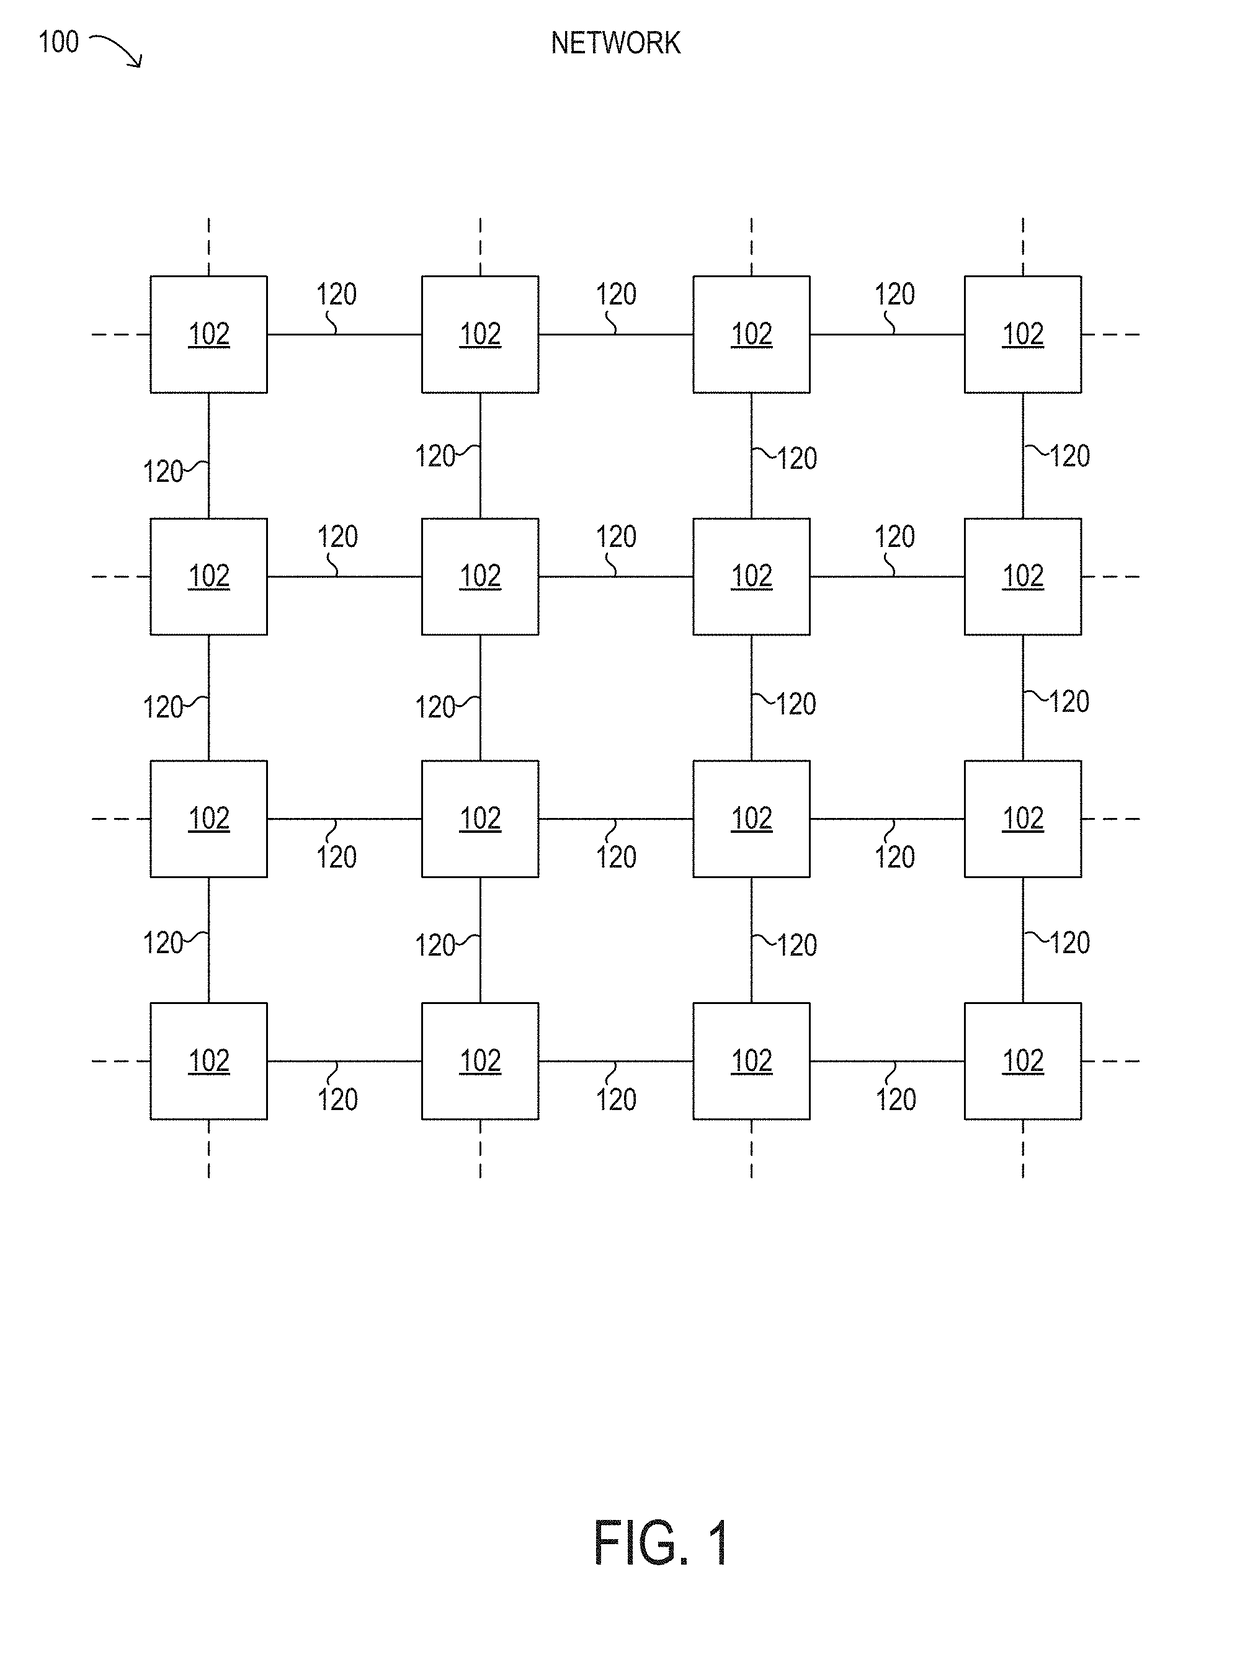 Network design method for ethernet ring protection switching